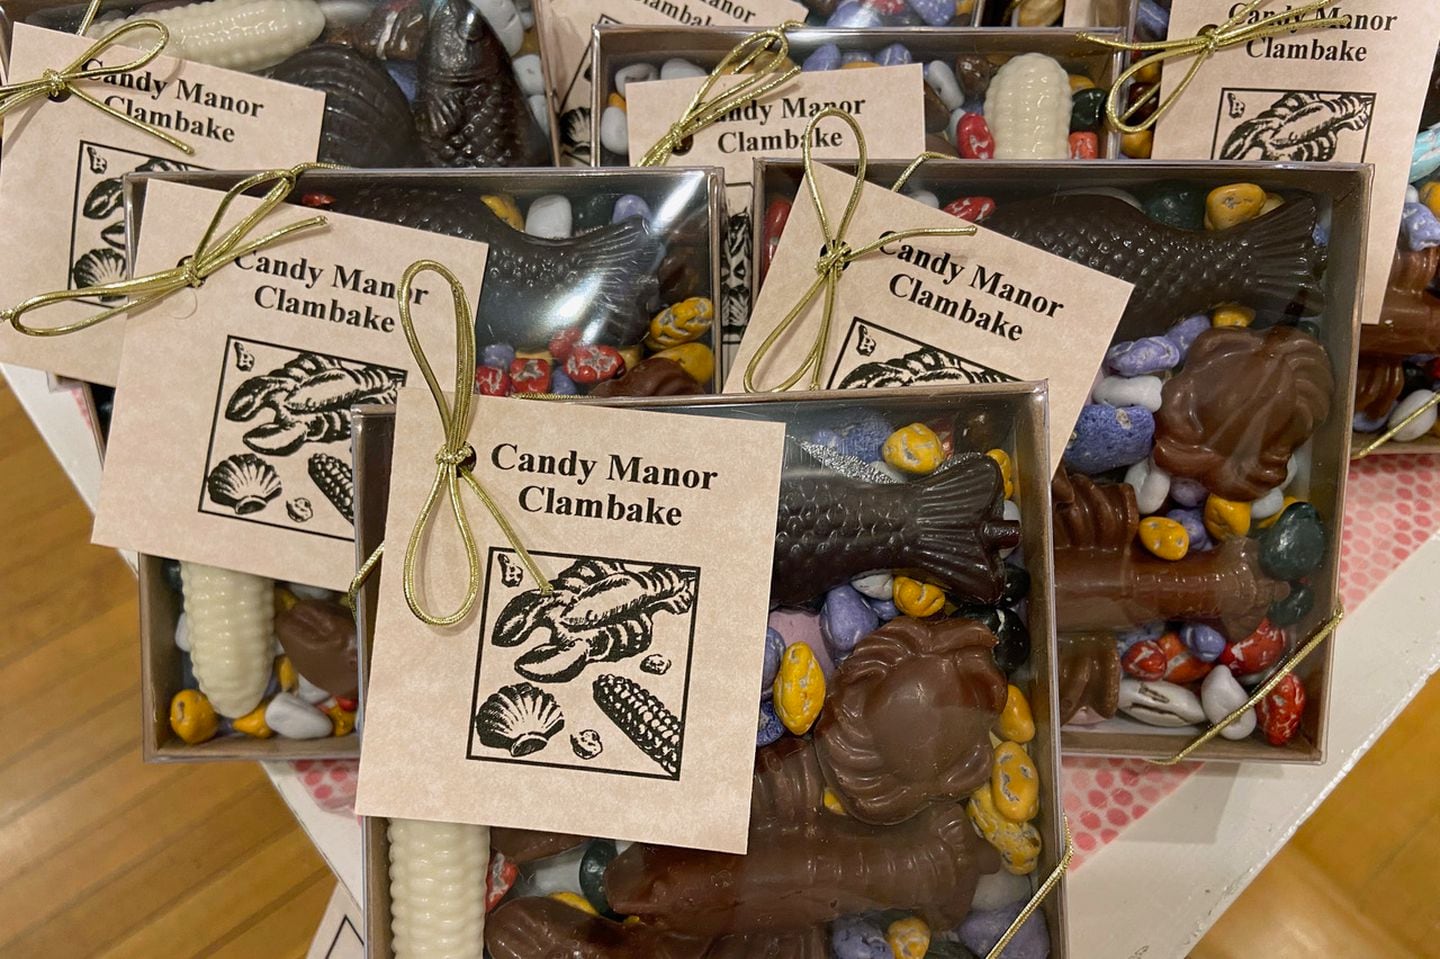 Chatham Candy Manor was launched in 1955 and is still going strong — year ‘round.